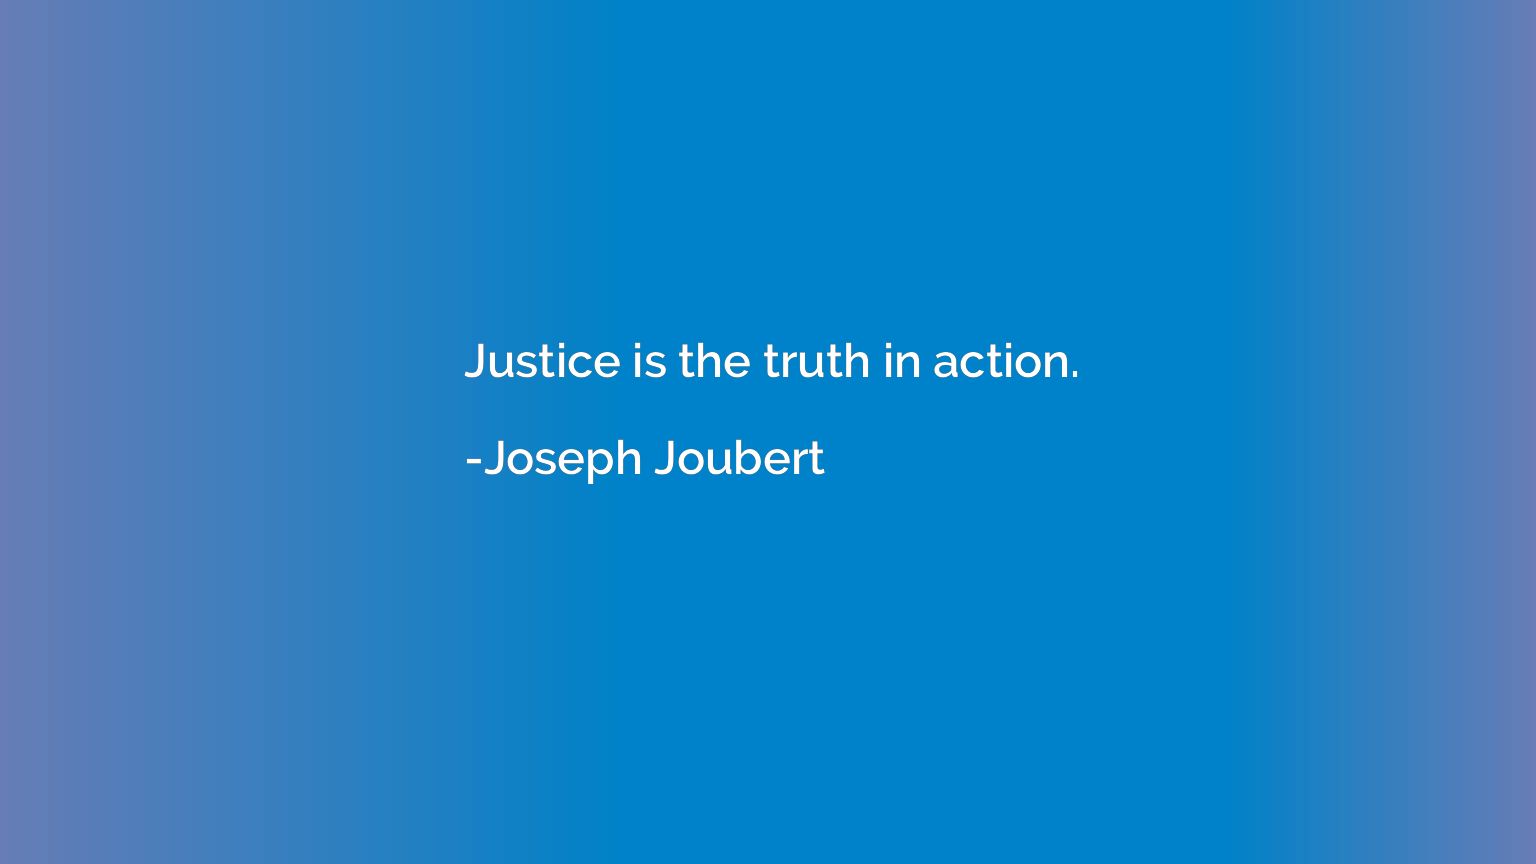 Justice is the truth in action.